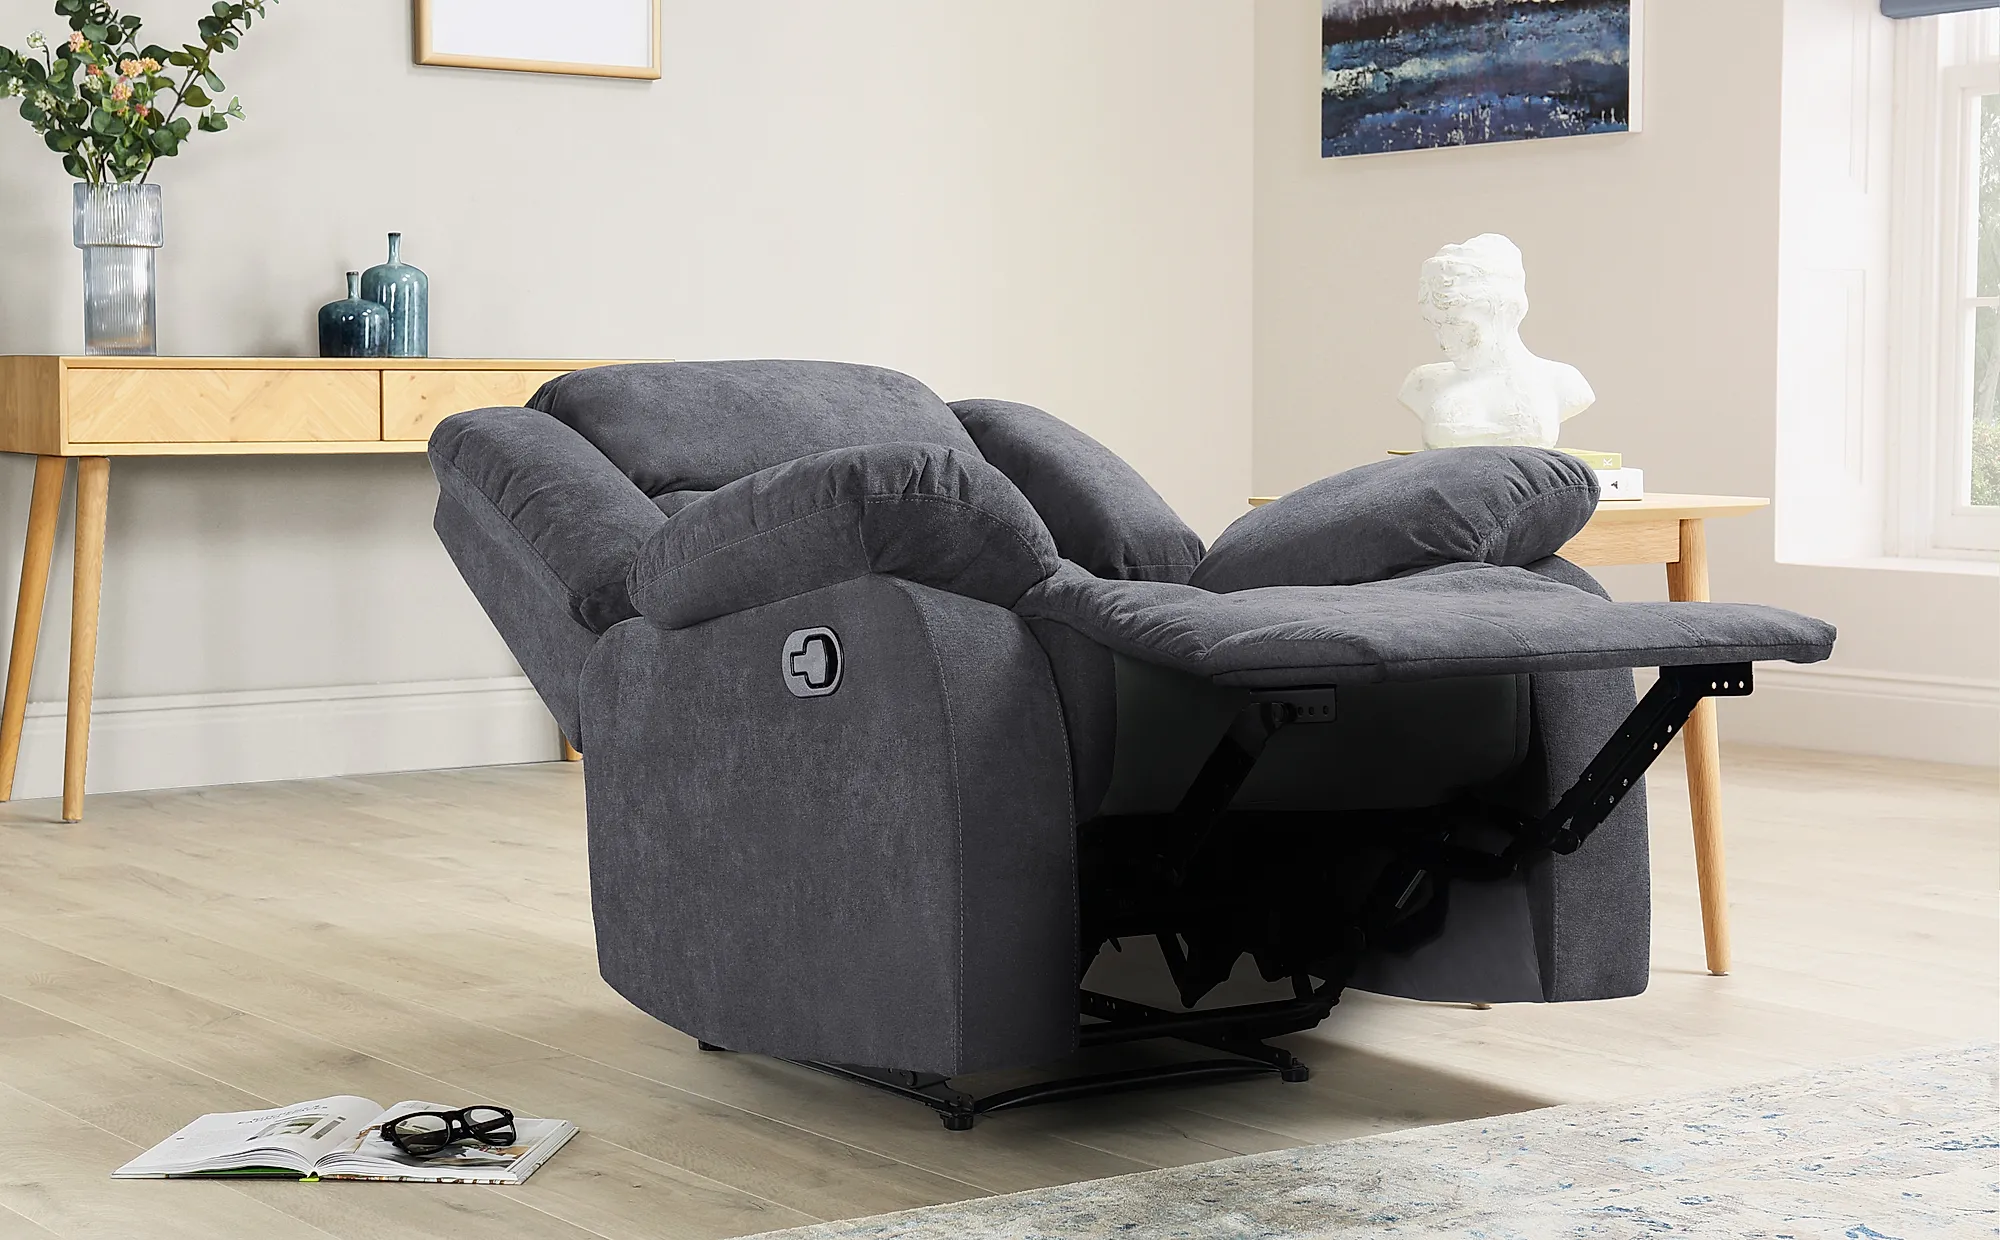 How Does an Electric Recliner Work